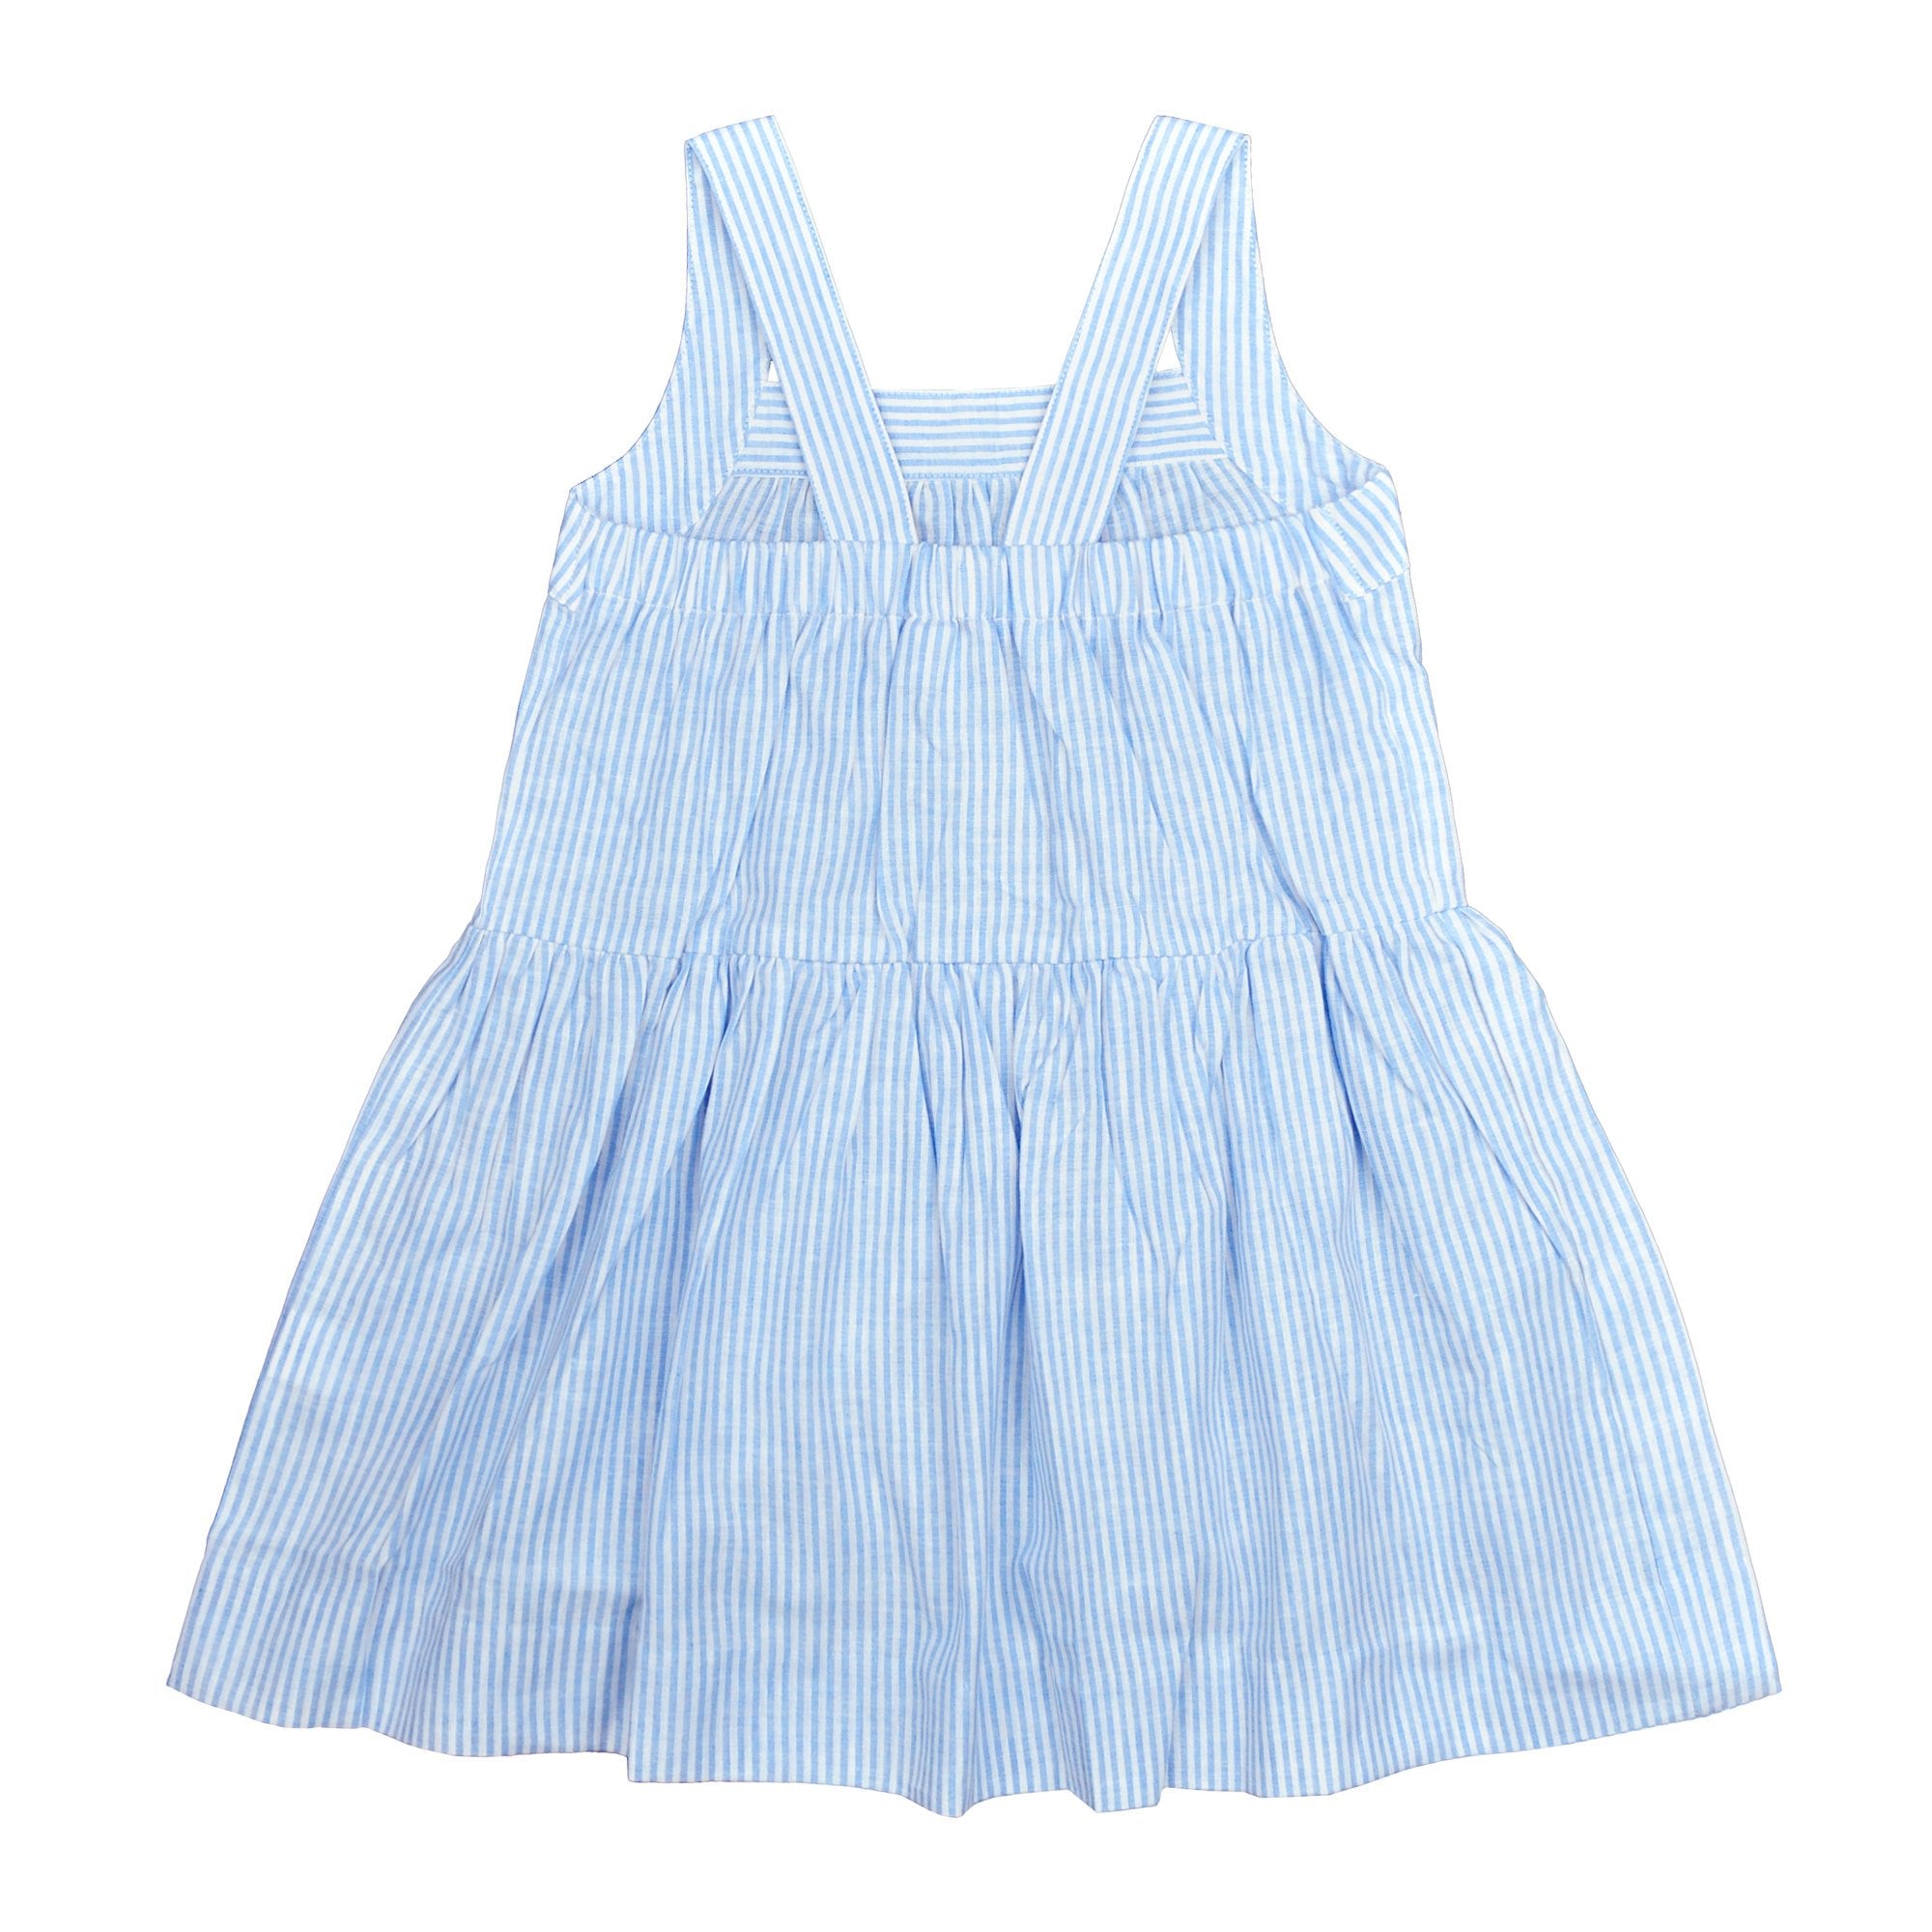 Camilla Dress In Blue And White Stripe - Cou Cou Baby